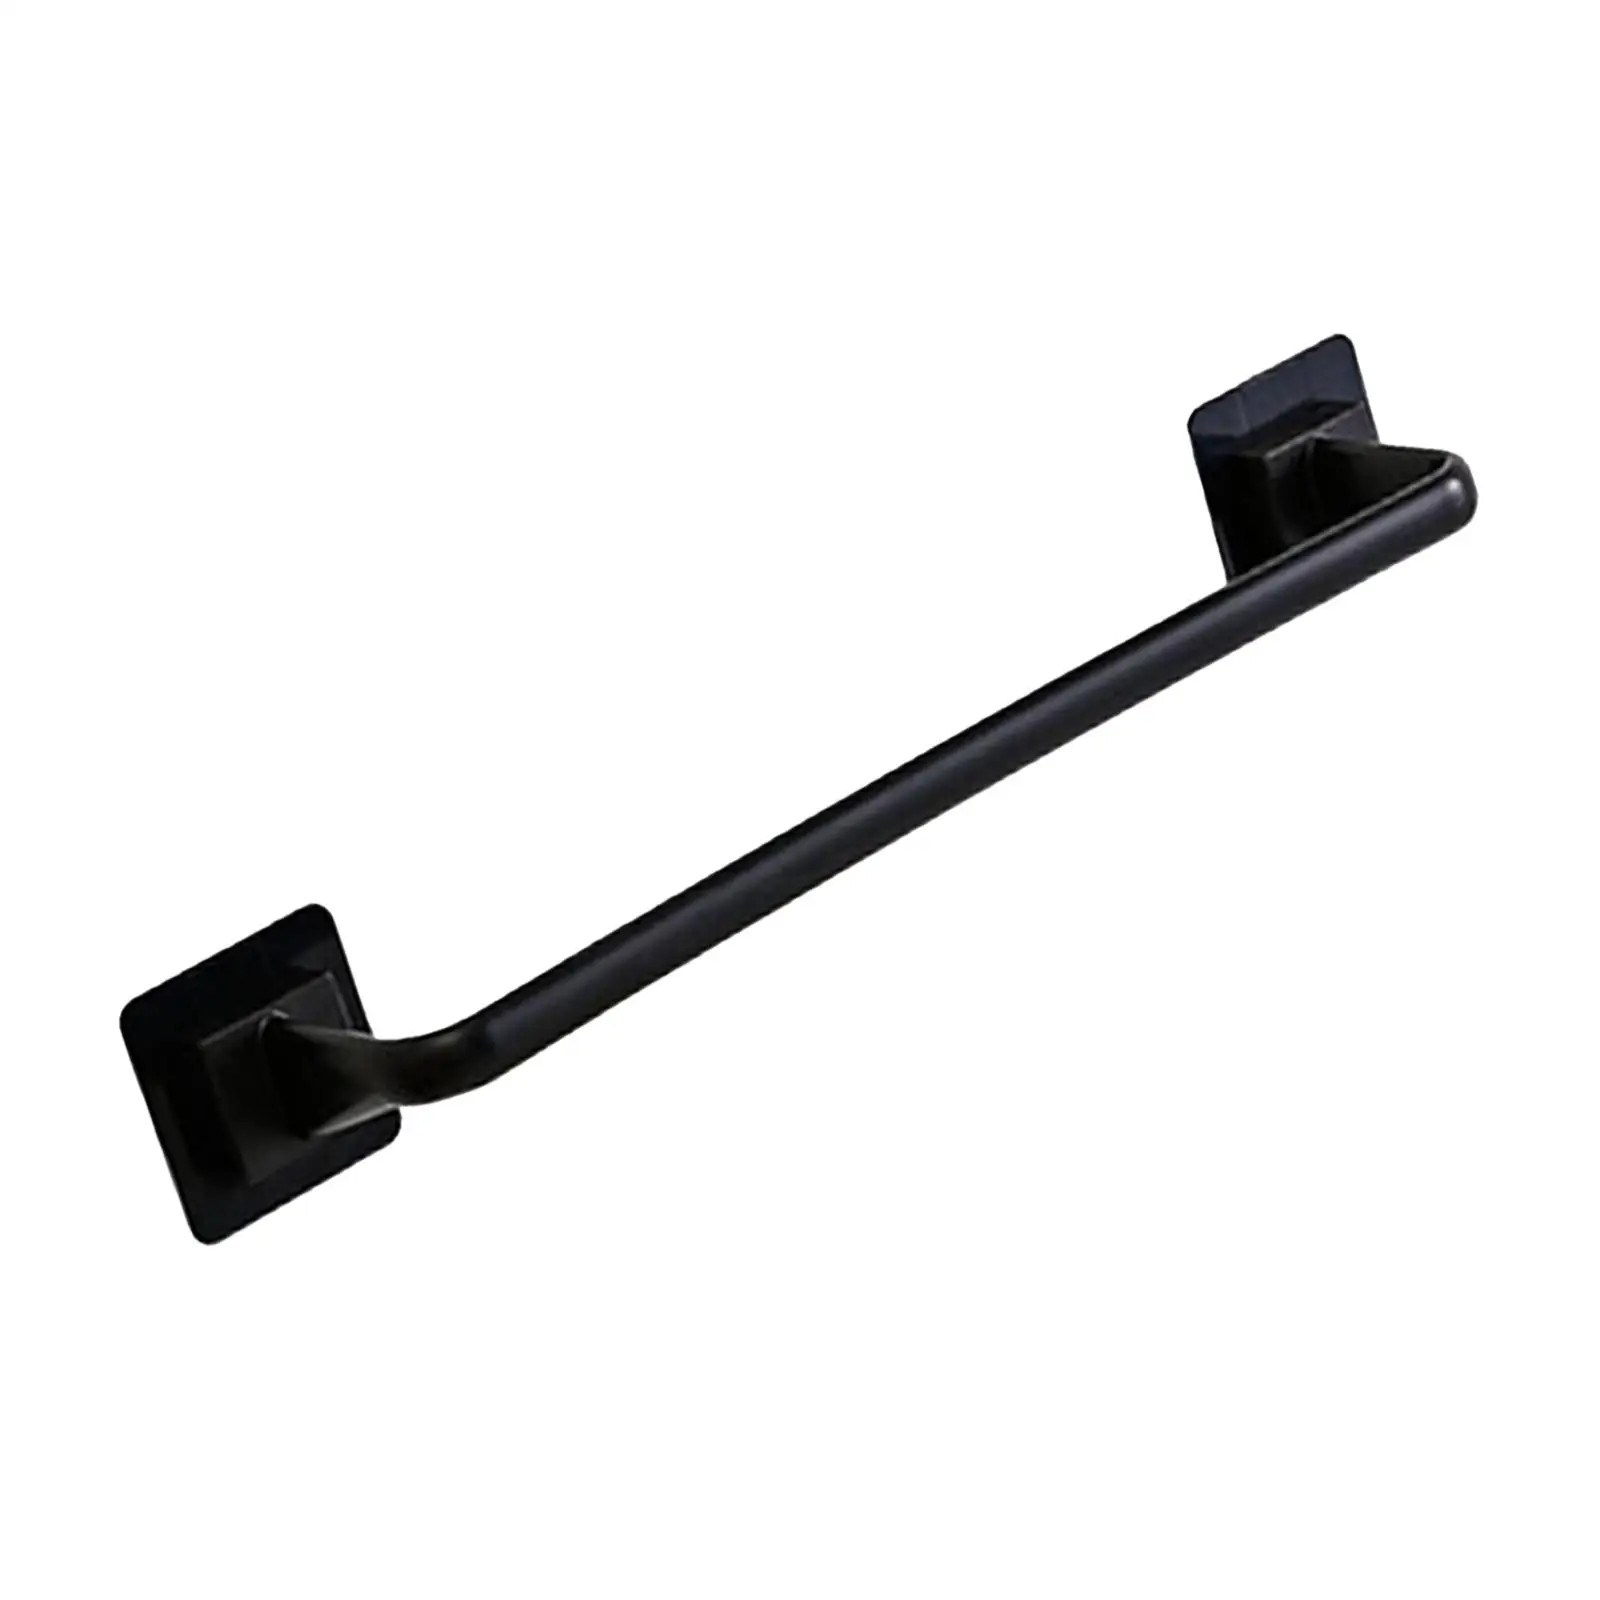 Over Cabinet Towel Bar or Outside of Doors Towel Bar Self Adhesive for Wall